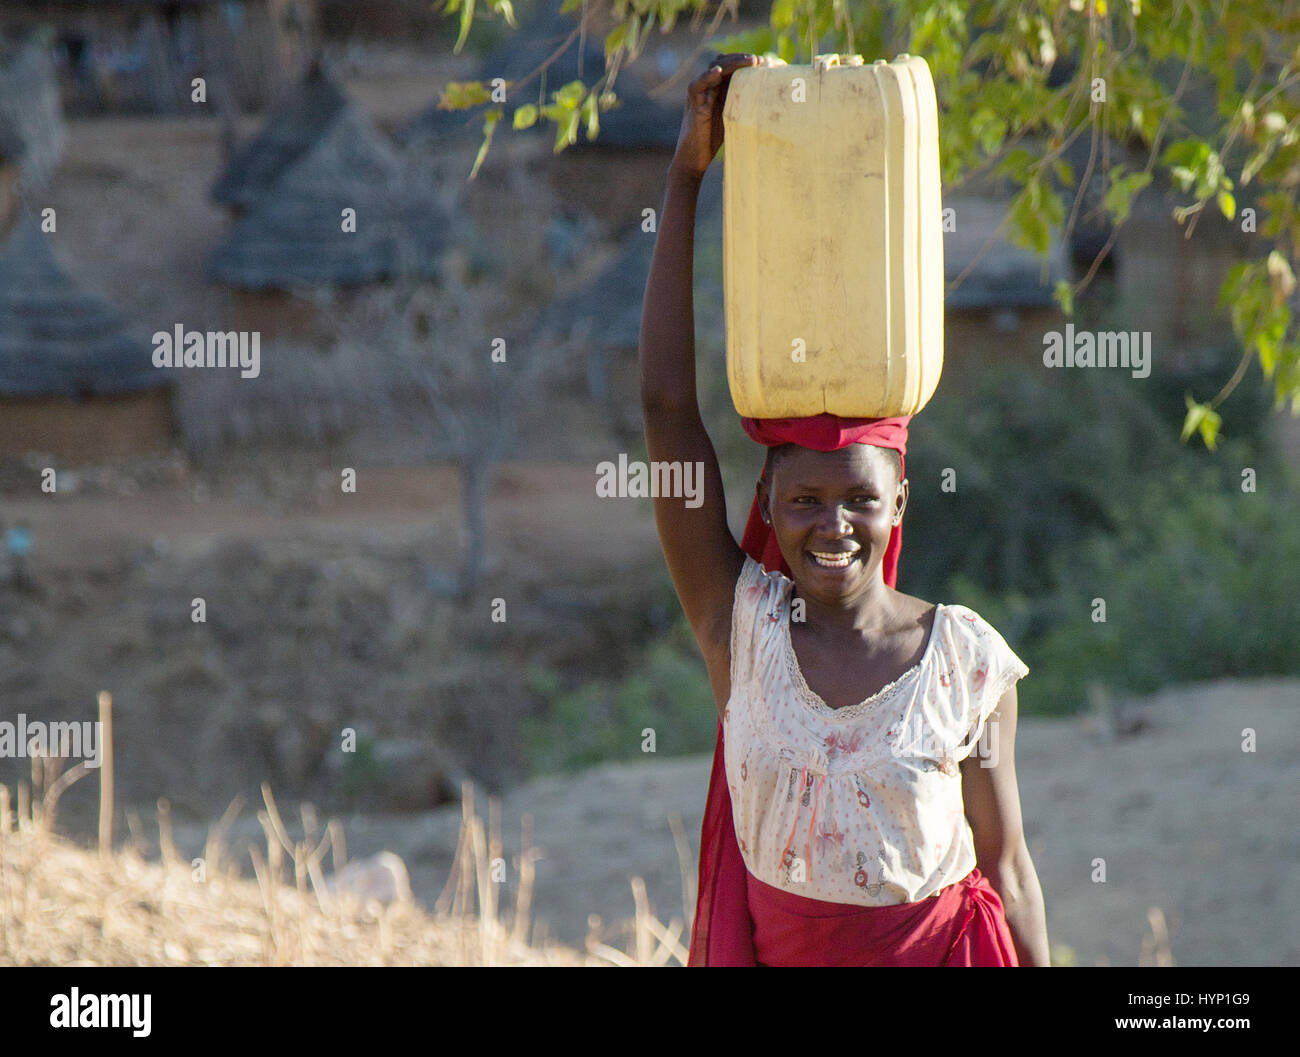 Kauda, Sudan. 12th Feb, 2017. A woman carries a water cannister on her head near Kauda, Sudan, 12 February 2017. There is no running water in the Nuba mountains. Woman are largely responsible for procuring water. The nearest pump is often several hours away. The Nuba mountains are controlled by the national liberation army Sudan People's Liberation Army-North (SPLA-N) and its political arm, the Sudan People's Liberation Movement-North (SPLM-N). Photo: Laura Wagenknecht/dpa/Alamy Live News Stock Photo